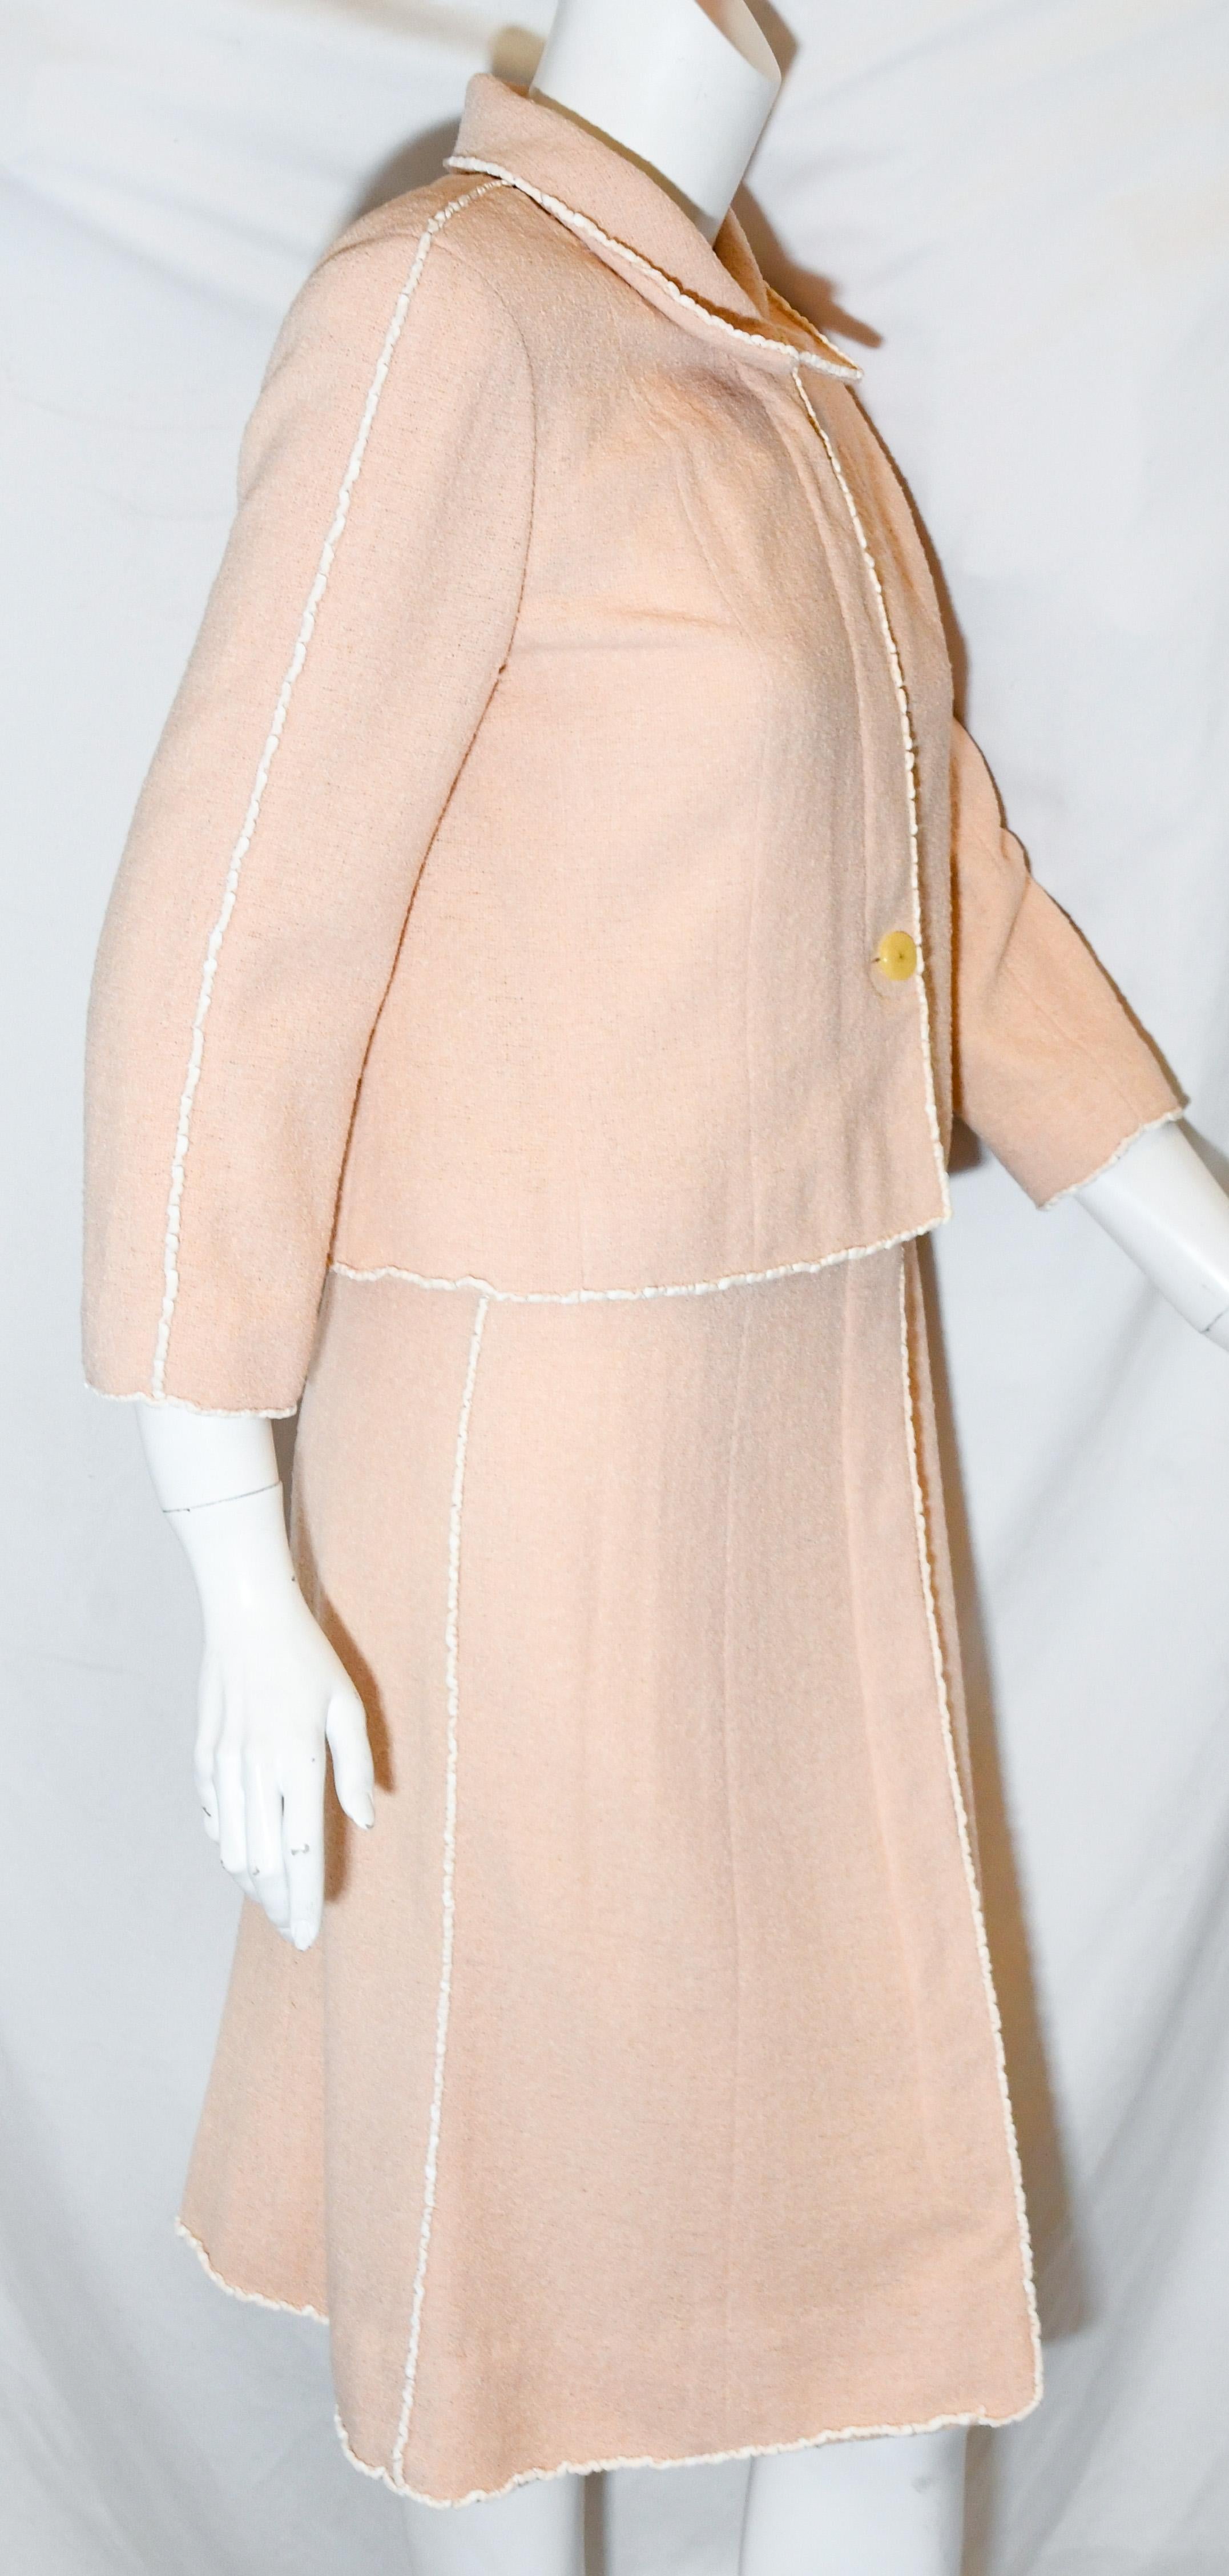 Women's Chanel Peach Wool Blend Skirt Suit with White Trim 36 For Sale